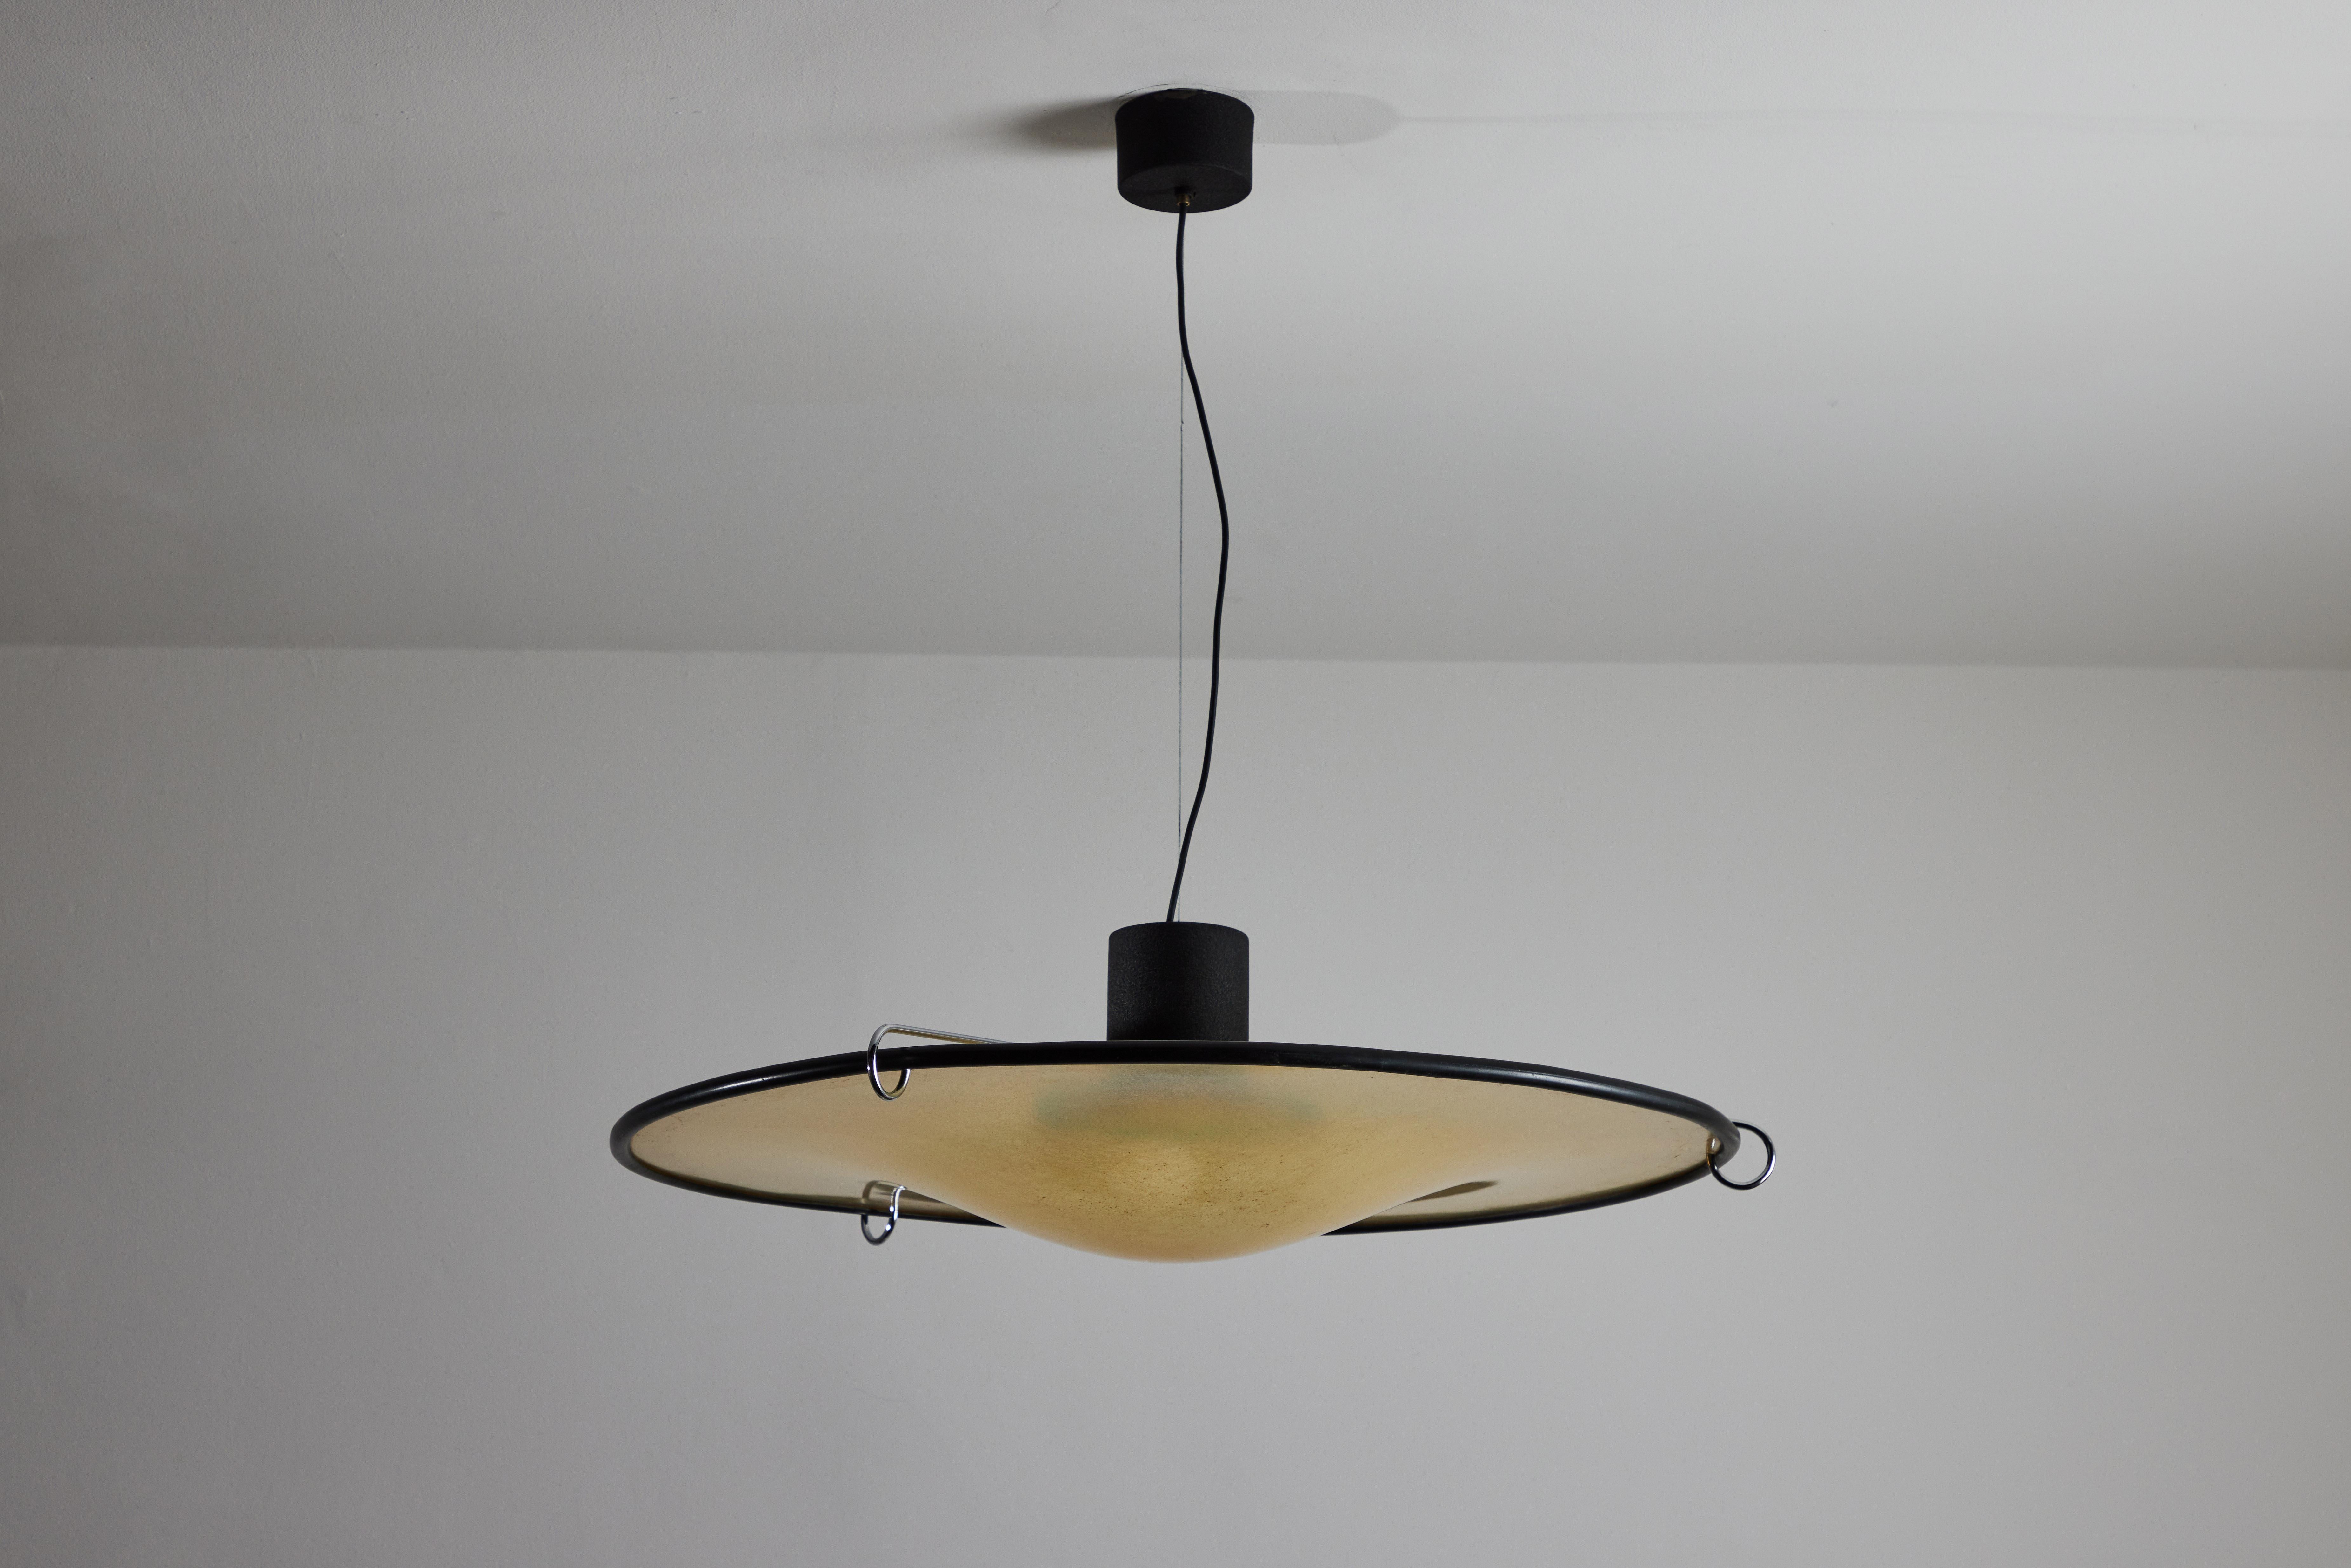 Late 20th Century Suspension Light by Luci-Cinisello Balsamo